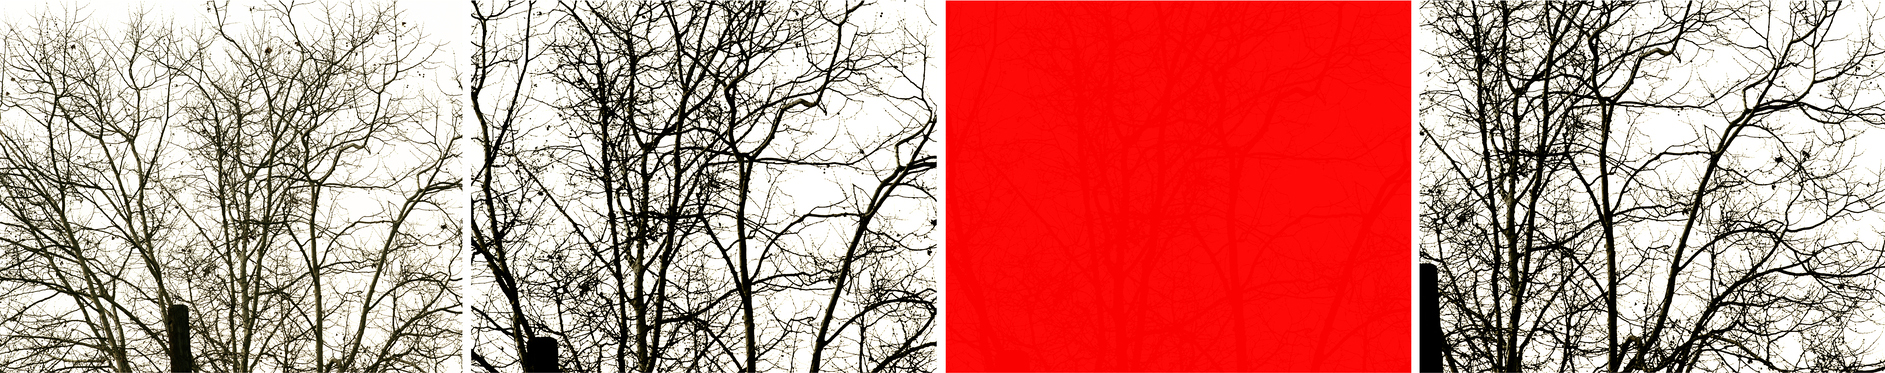 four photographs by Uta Barth, three frames show winter trees and one frame is bright red